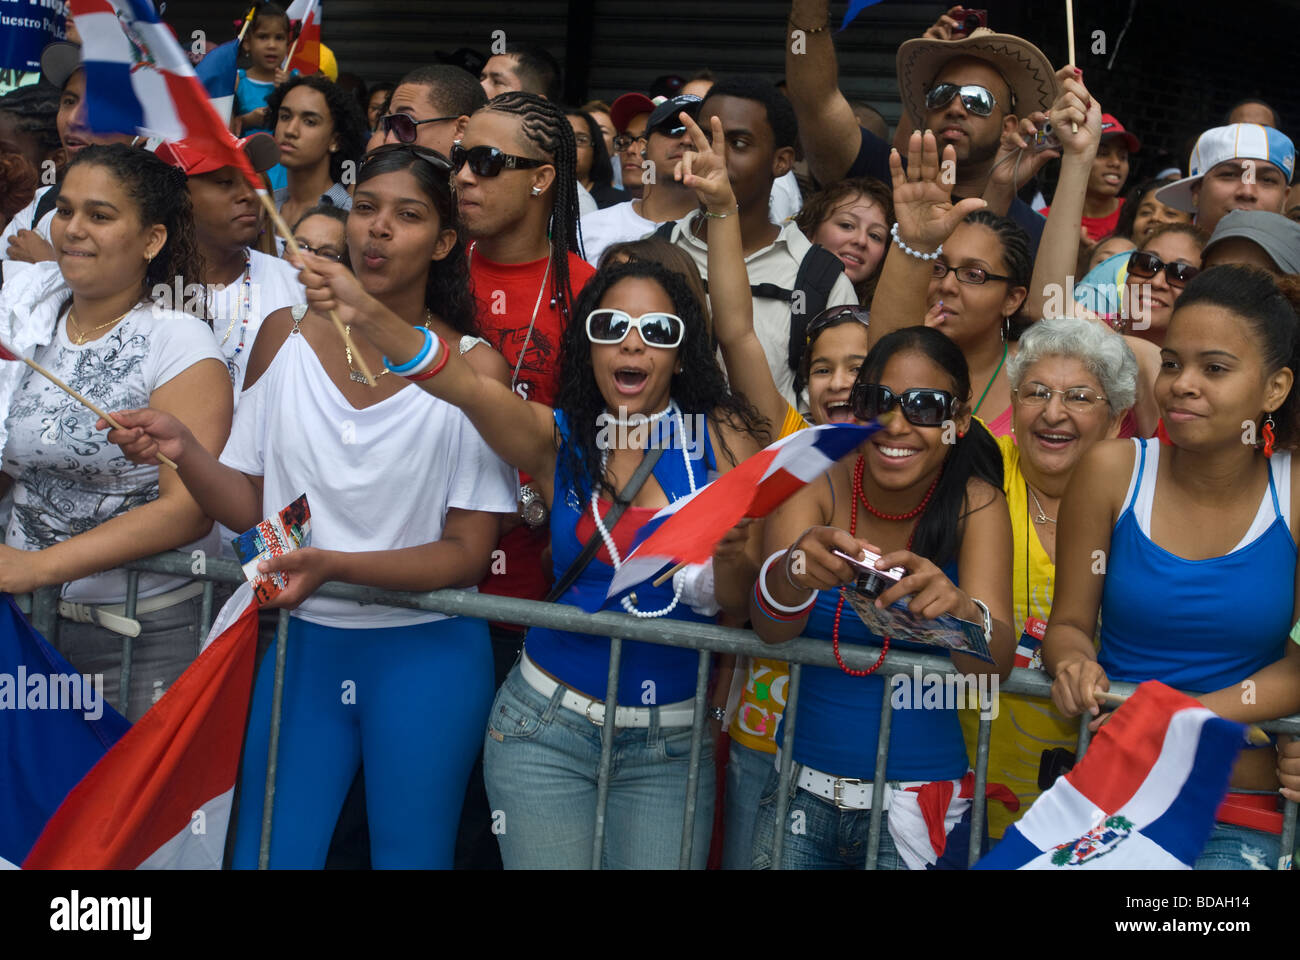 27th Annual Dominican Independence Day Parade in New York Stock Photo